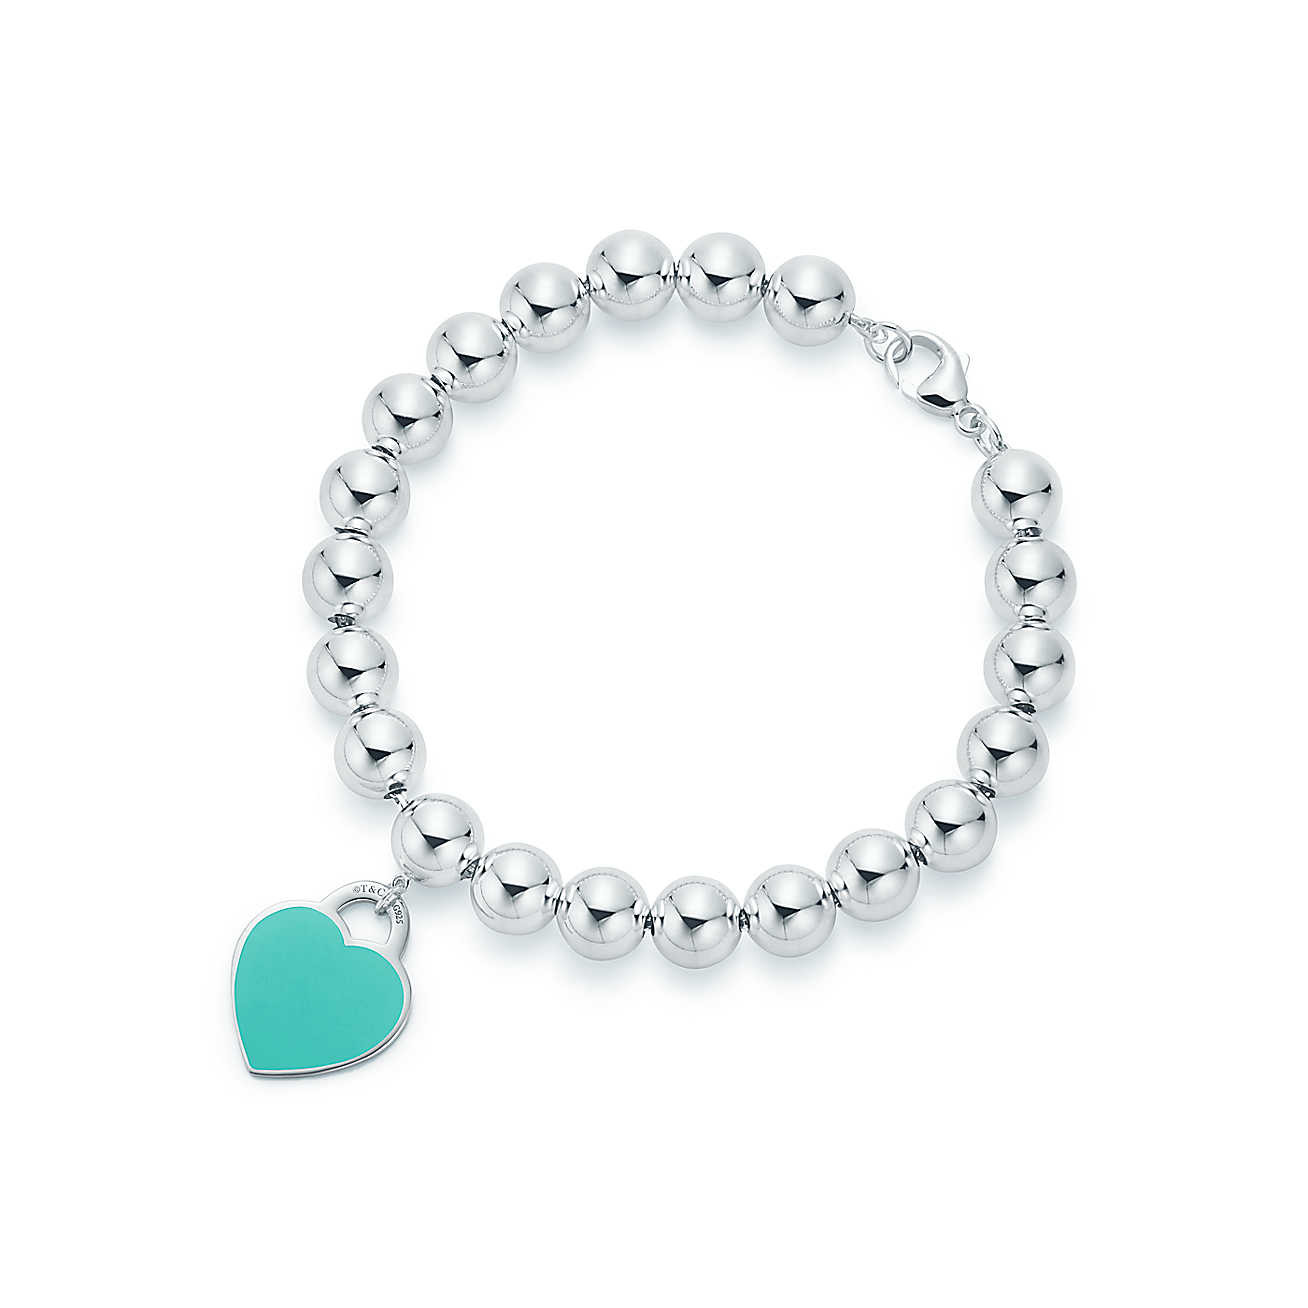 Tiffany Bead Bracelet
 Return to Tiffany™ heart tag in sterling silver on a bead